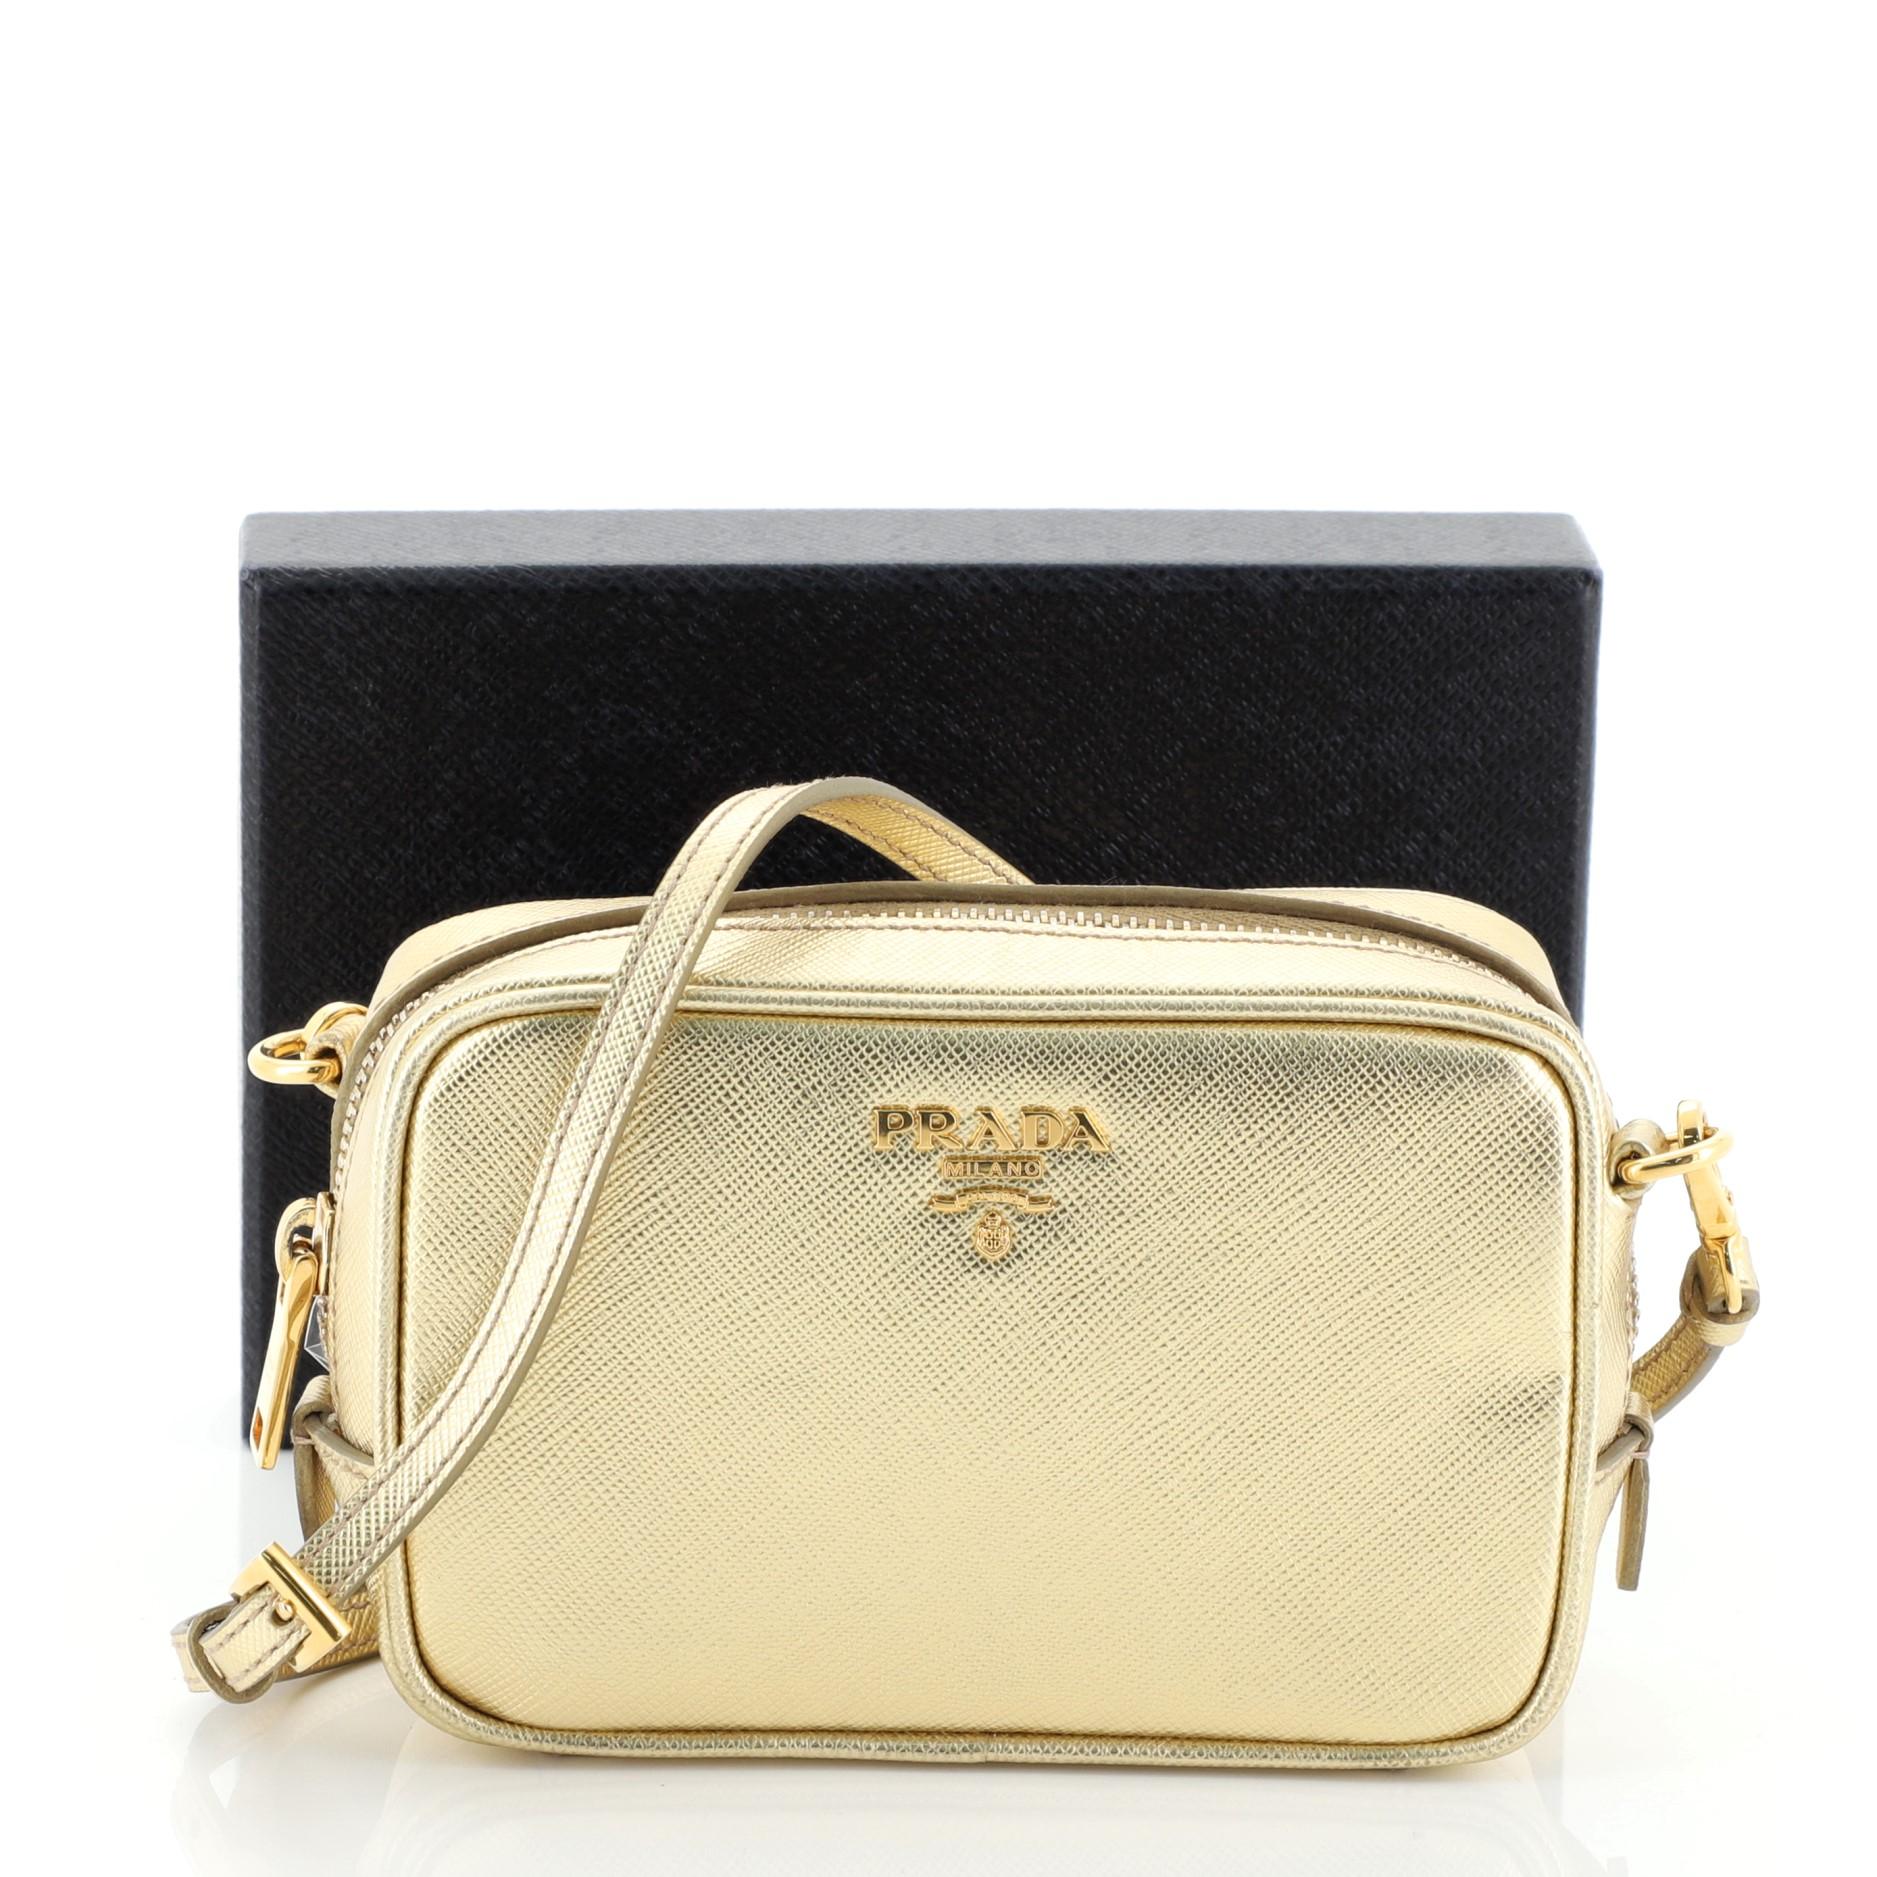 This Prada Zip Crossbody Bag Saffiano Leather Mini, crafted in metallic gold saffiano leather, features gold-tone hardware, long leather adjustable straps, signature Prada logo and gold-tone hardware. Its zipped closure opens to a neutral fabric